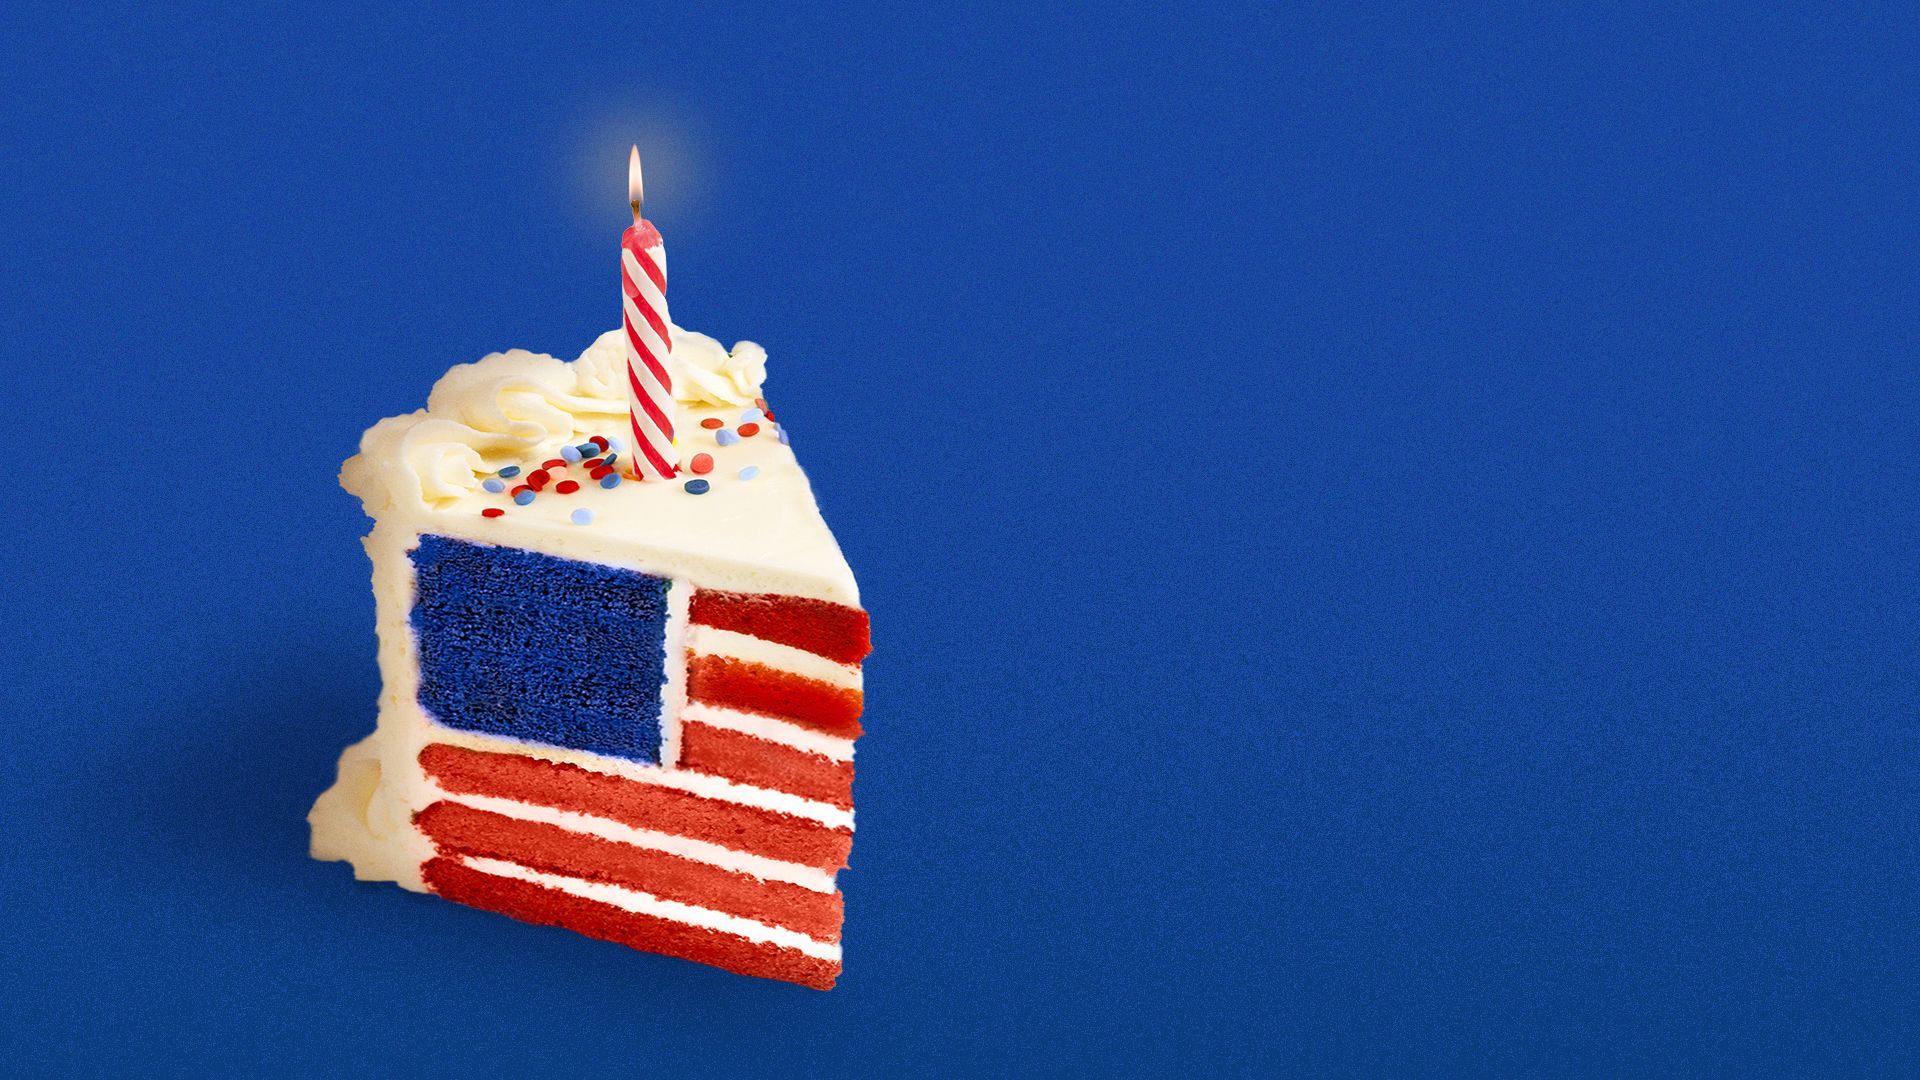 Illustration of a piece of cake with tiers that make the American flag.